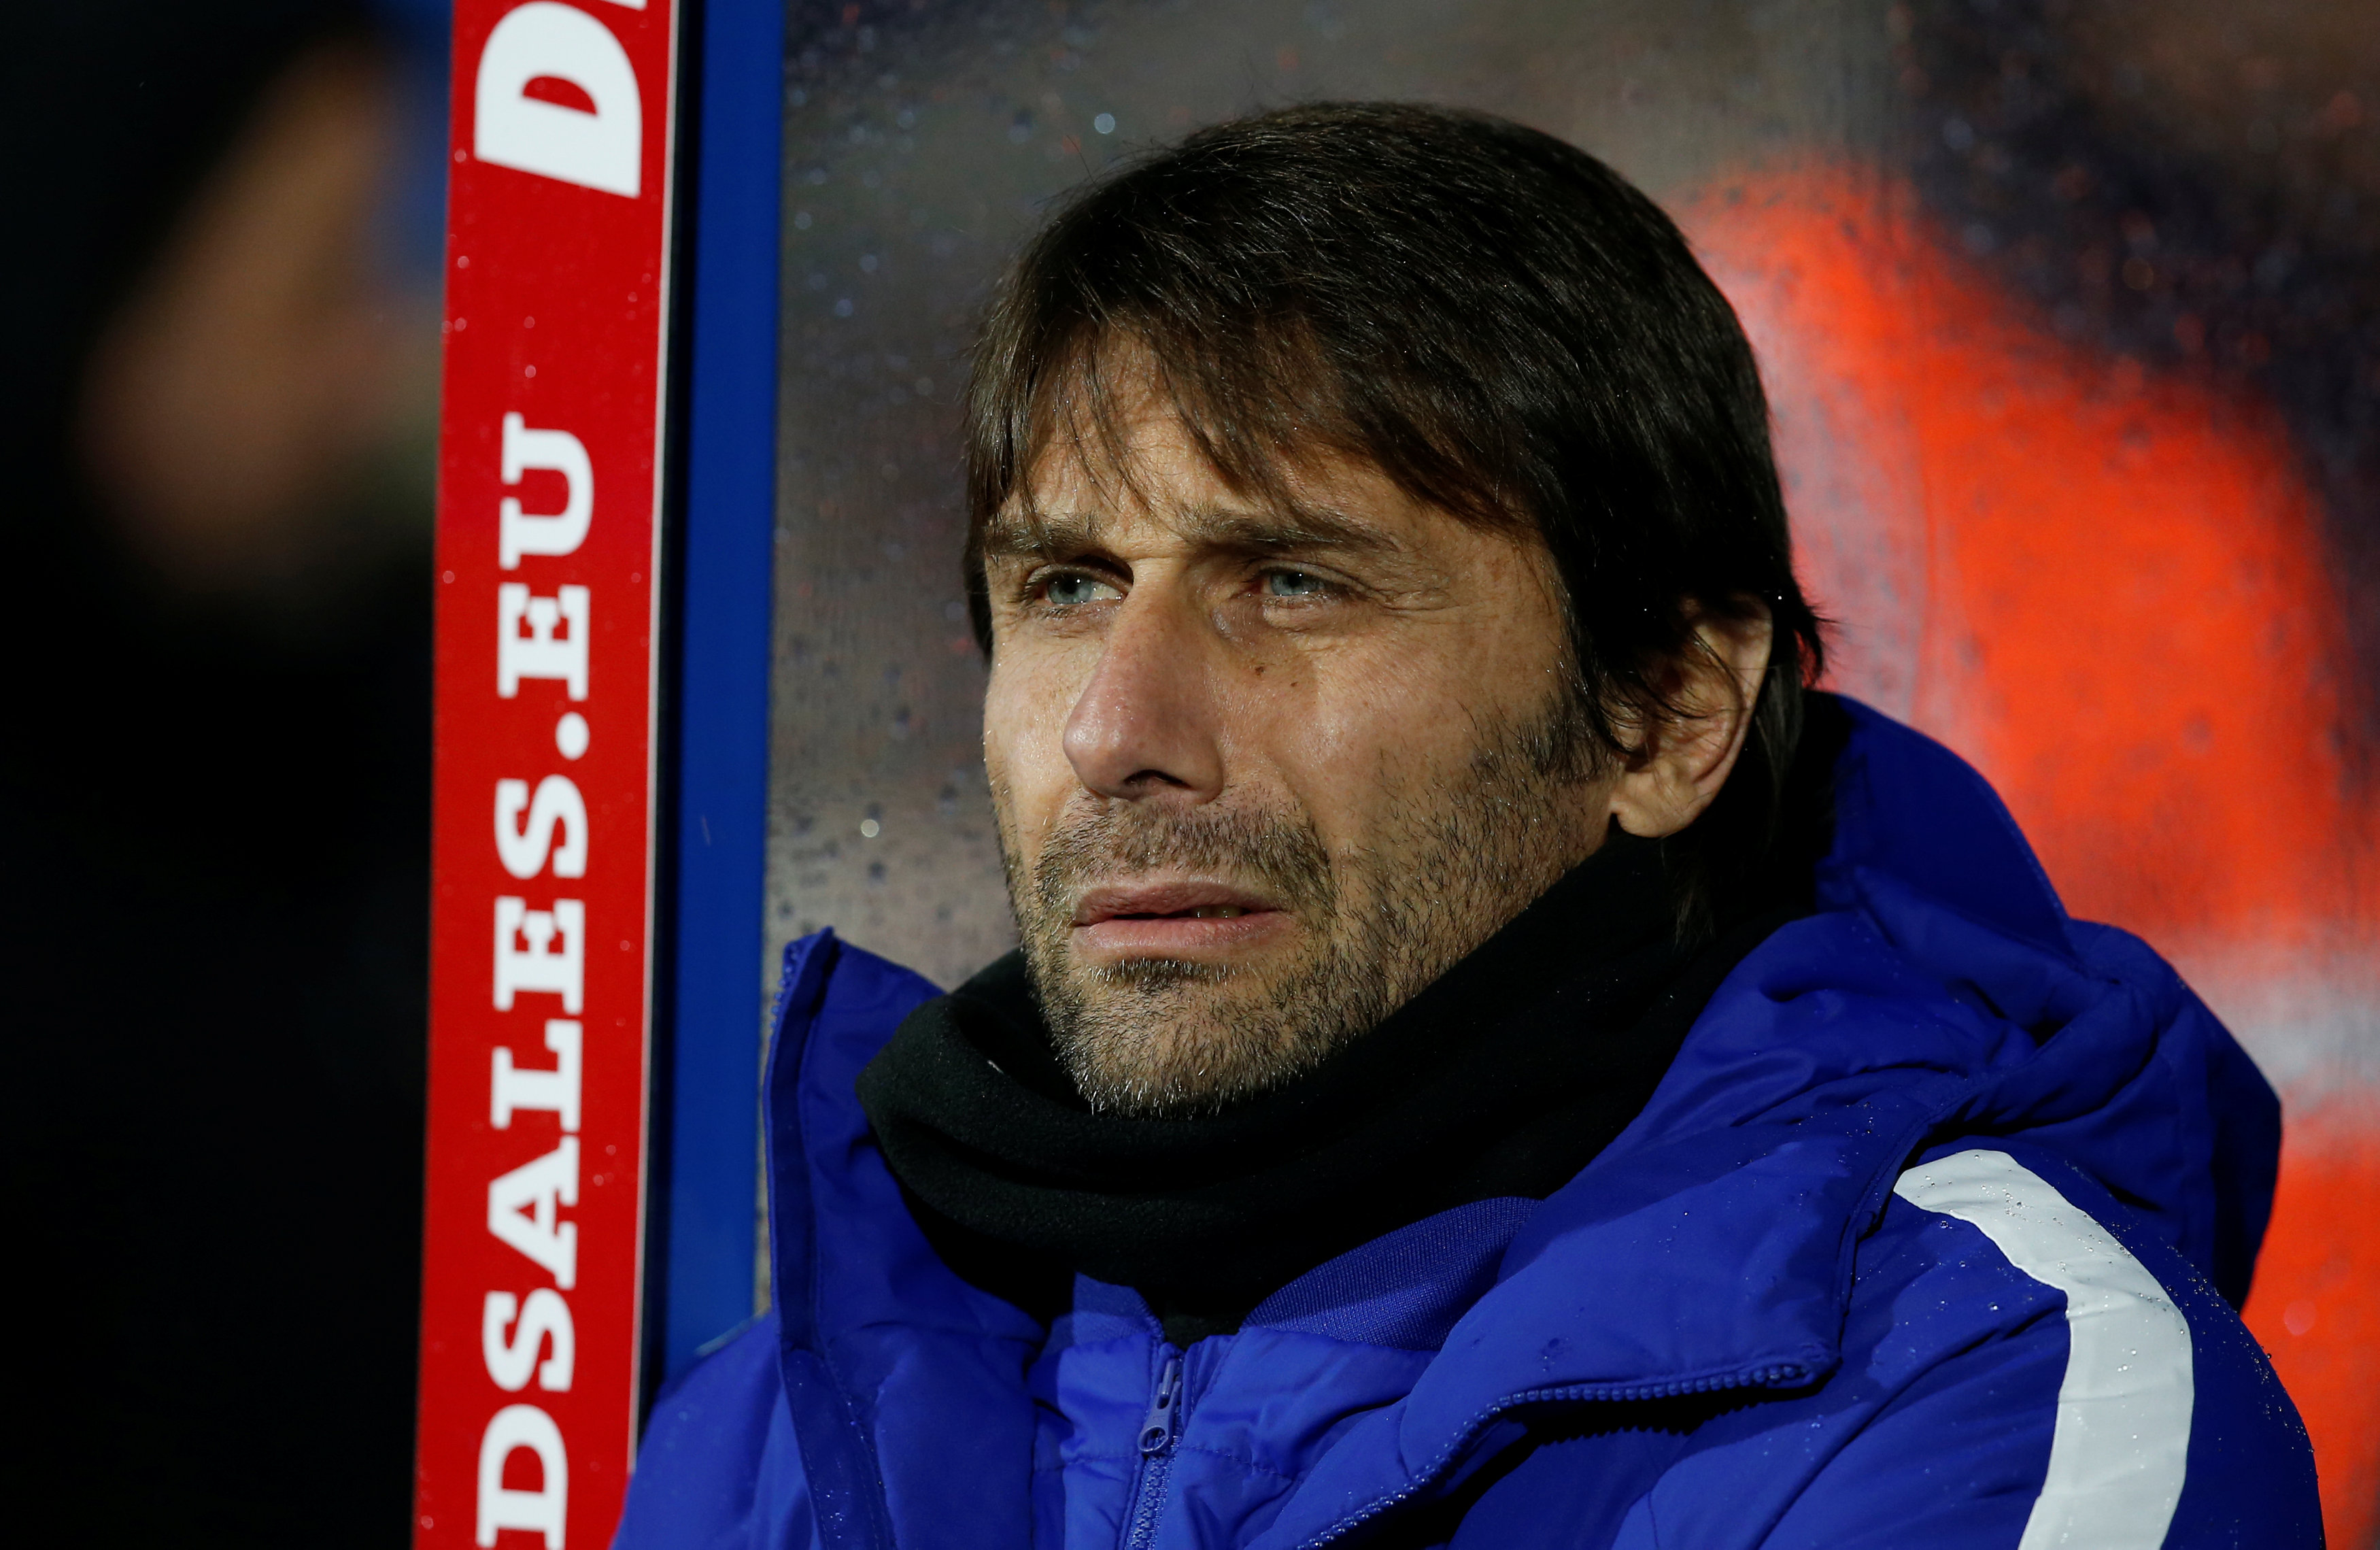 Football: Rivals must find way to challenge City, says Conte